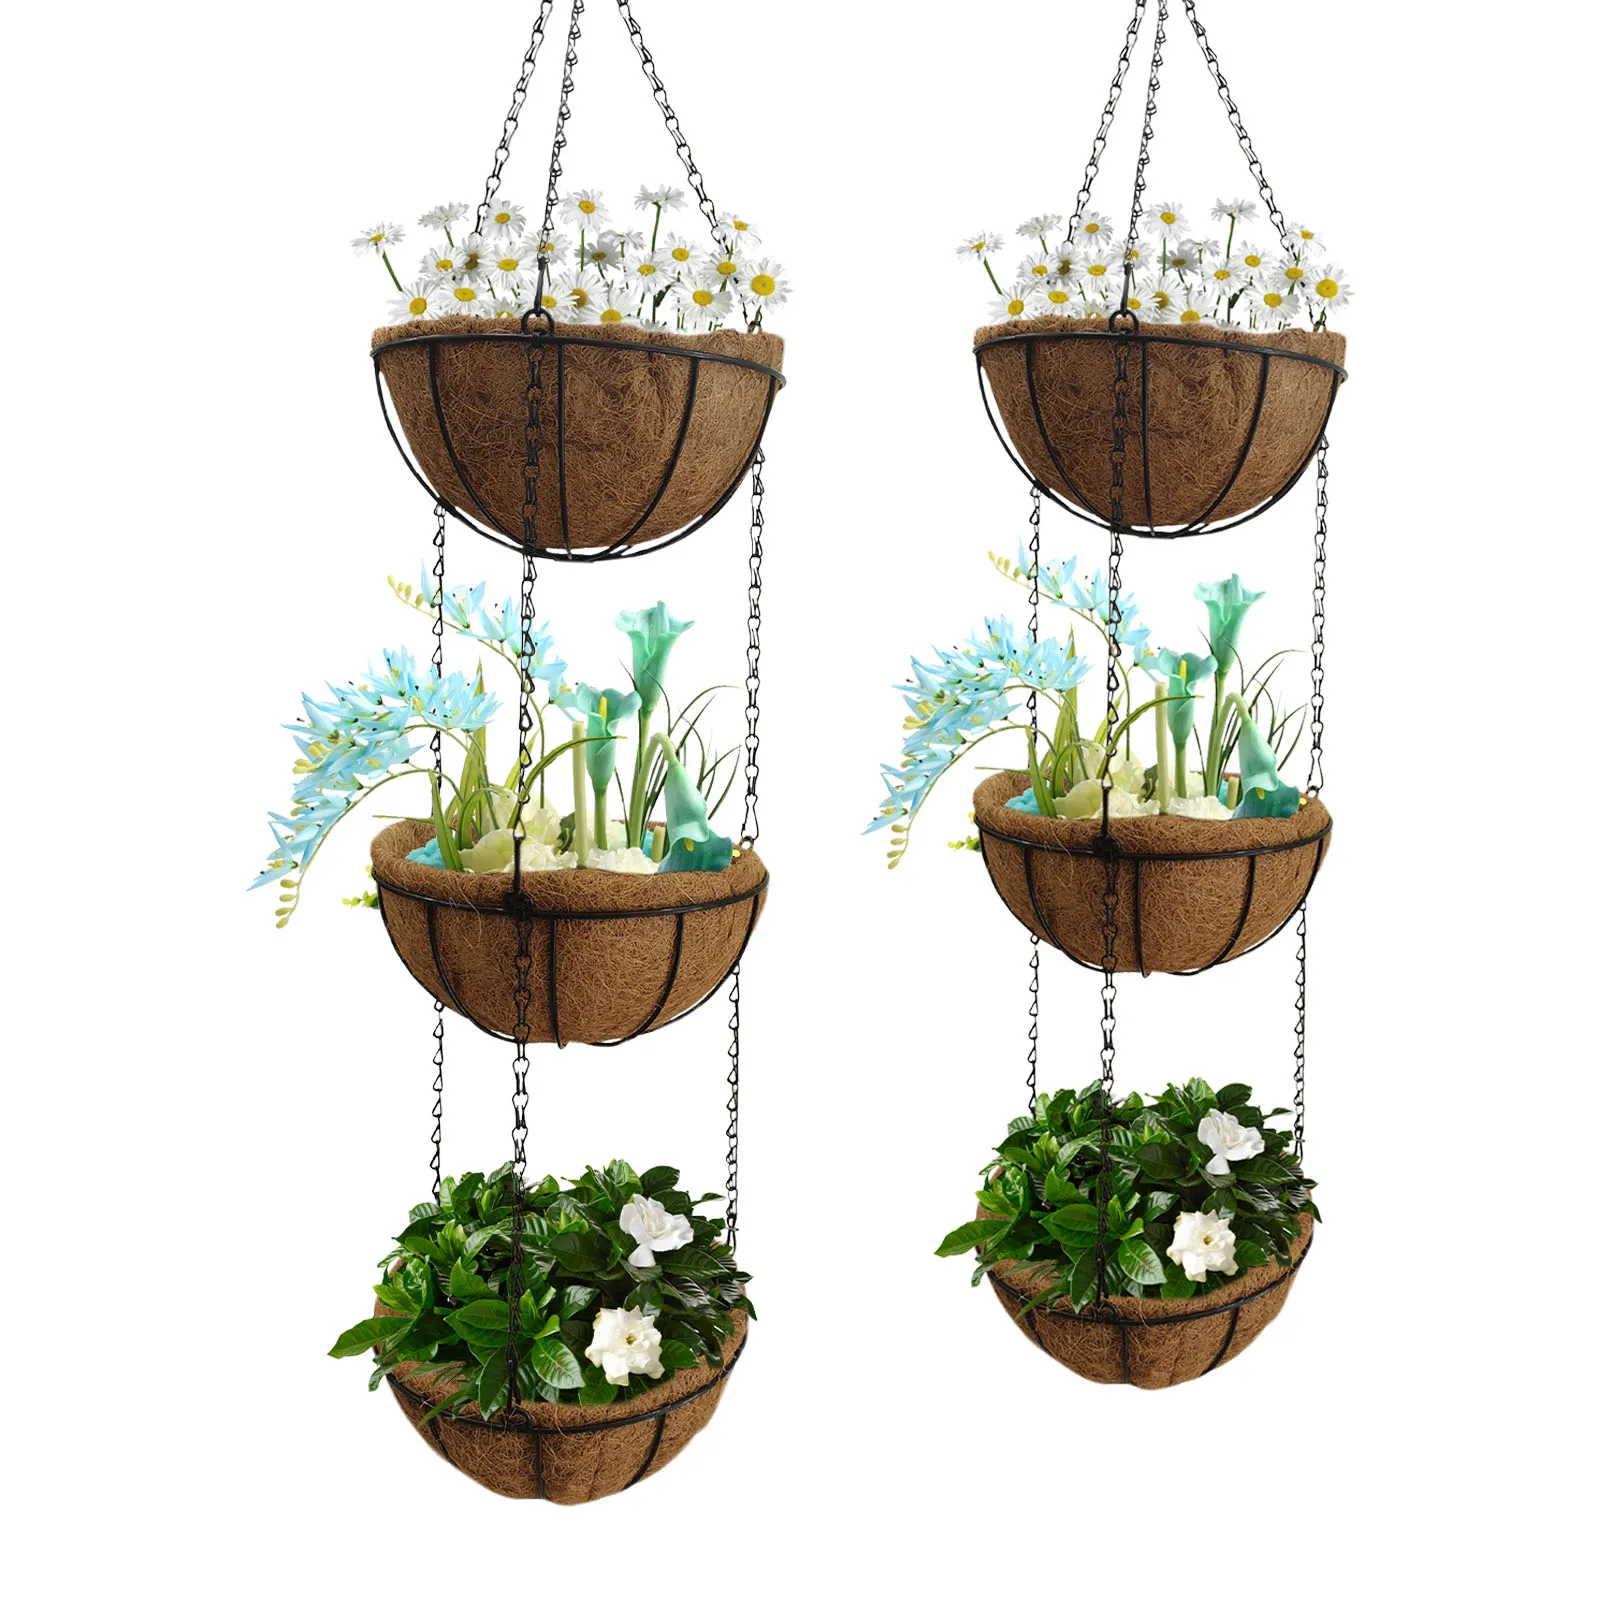 

Metal Hangings Basket 3 Layers Round Coco Liners For Hangings Basket Coconut Fiber Planter Inserts Replacement Liner Room Plant